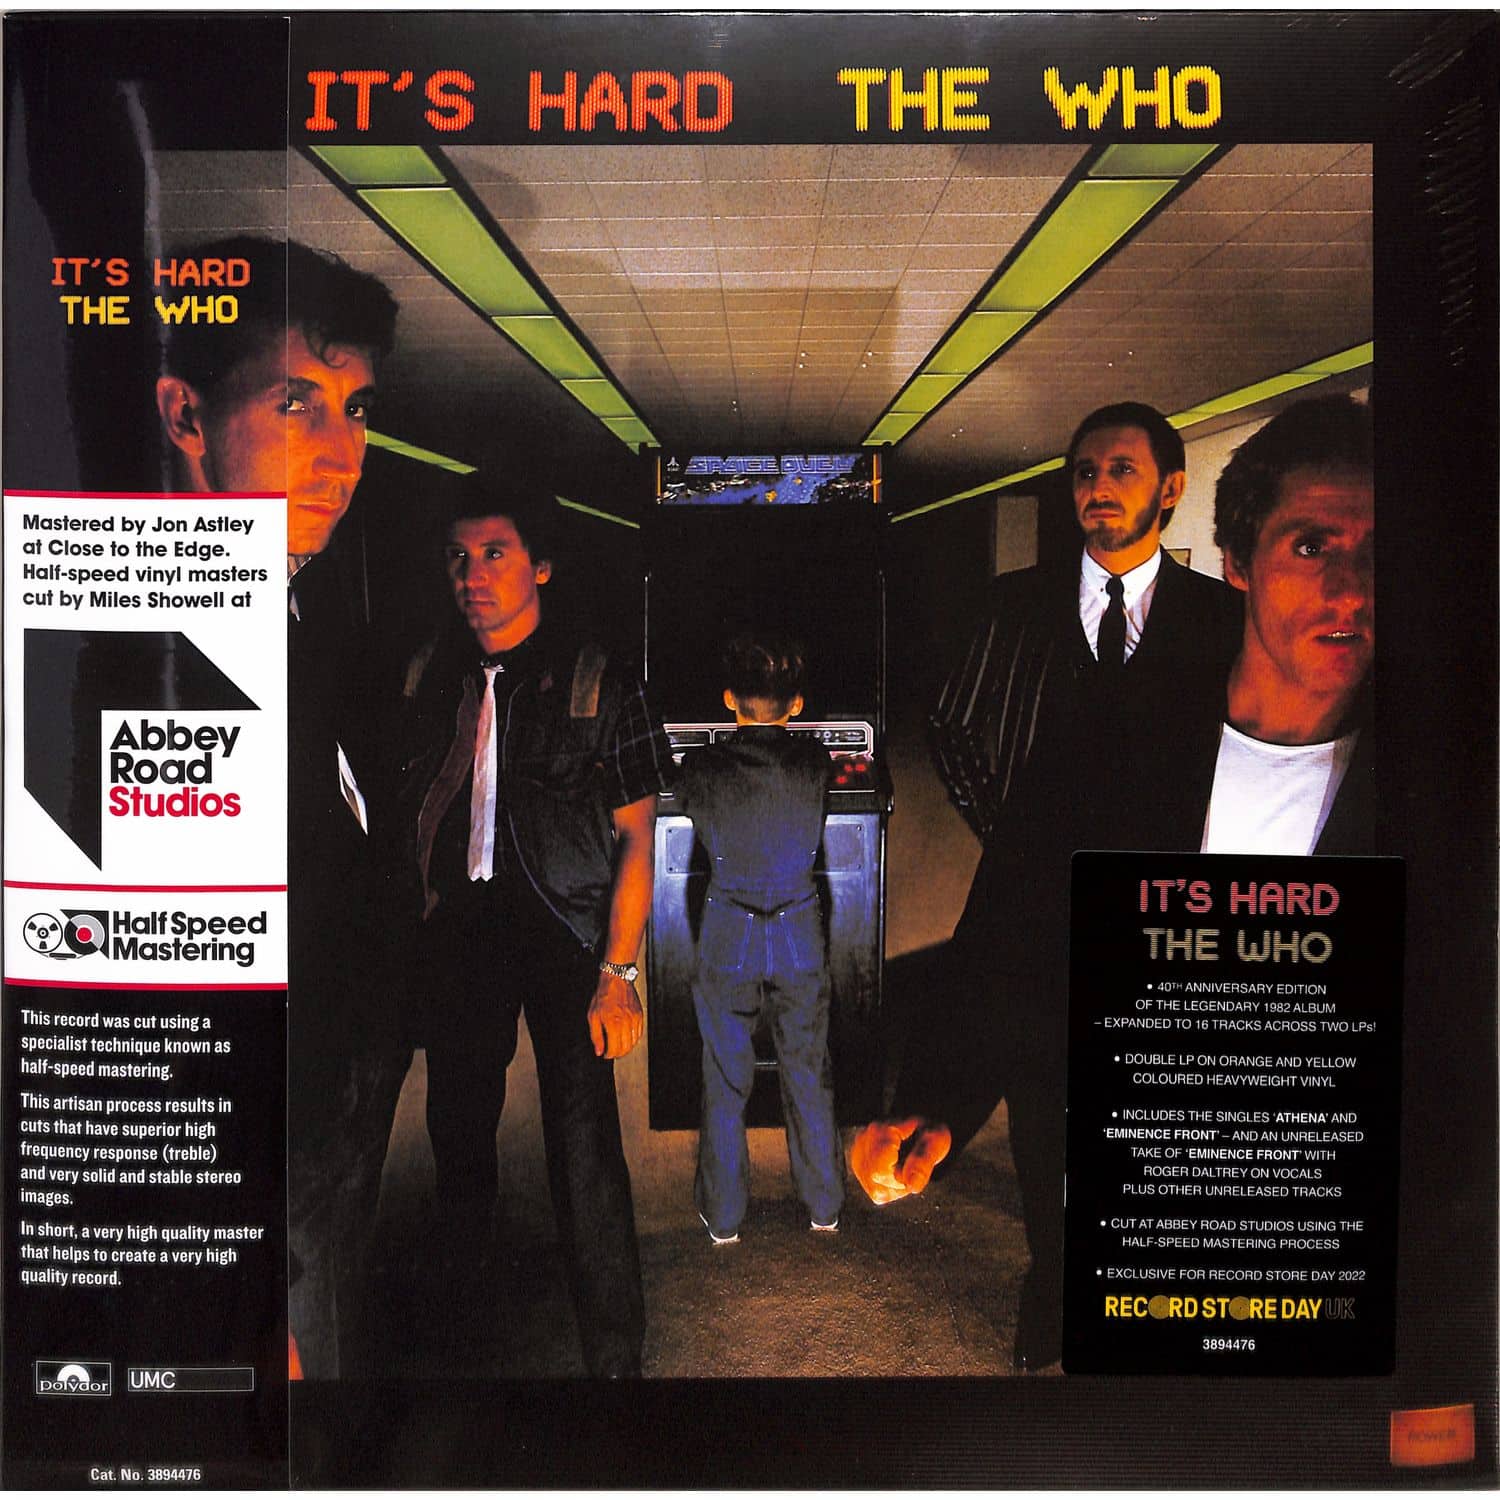 The Who - ITS HARD 